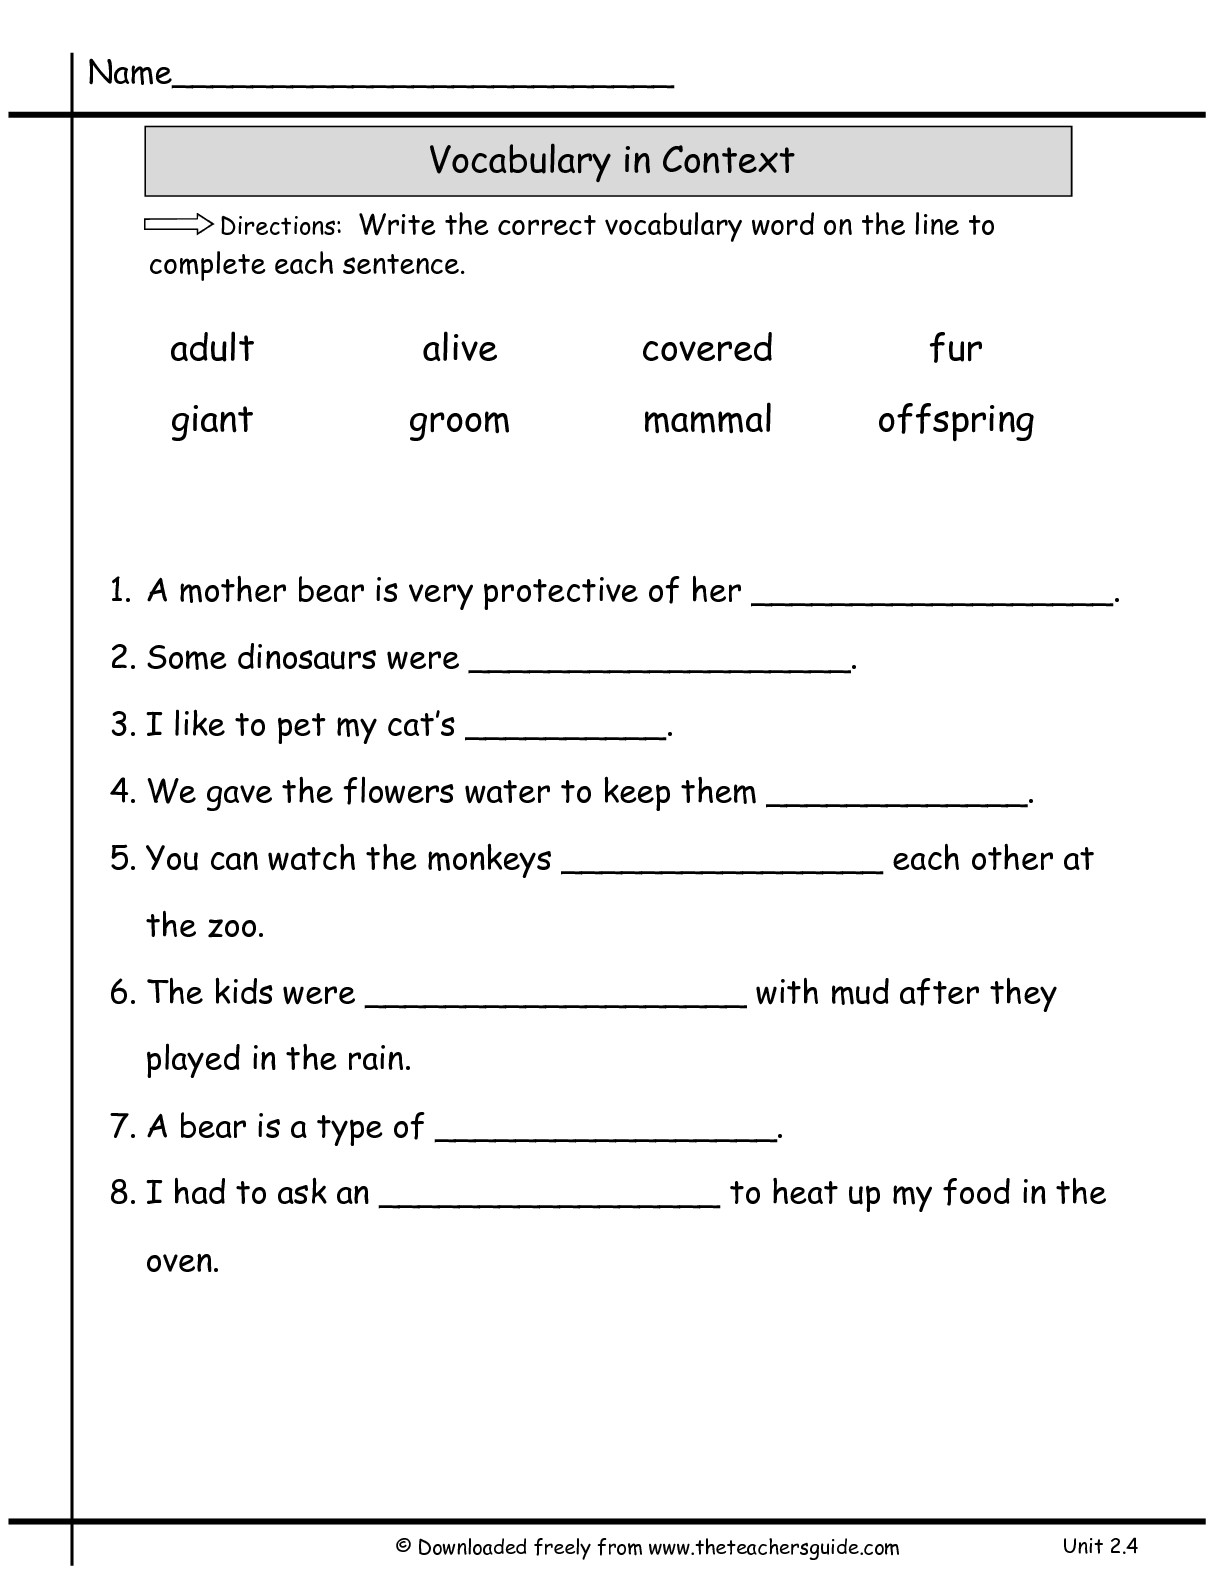 15-best-images-of-4th-grade-map-skills-printable-worksheets-following